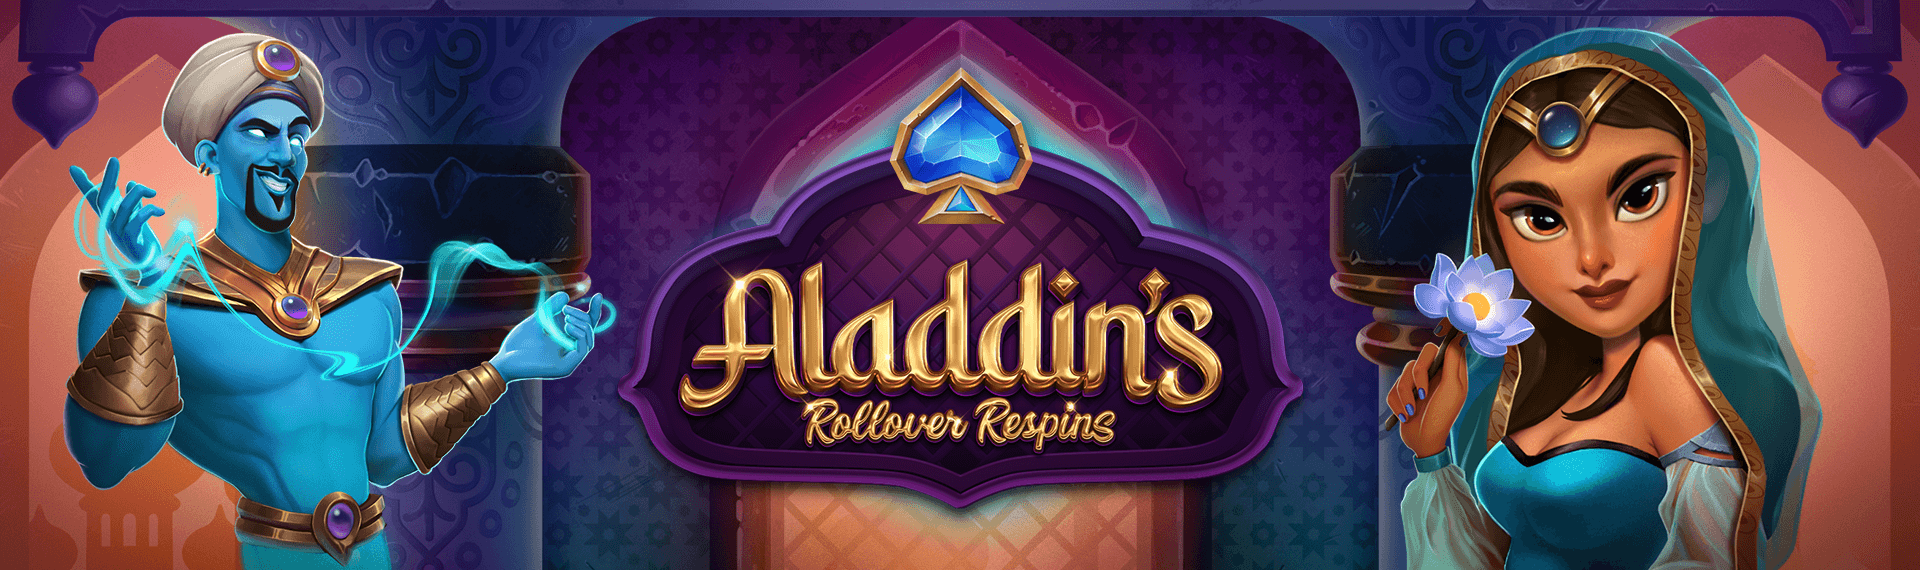 Aladdin's Rollover Respins Screenshot <br />
<b>Notice</b>:  Undefined variable: key in <b>/var/www/html/wp-content/themes/armadillo/page-game.php</b> on line <b>37</b><br />
1